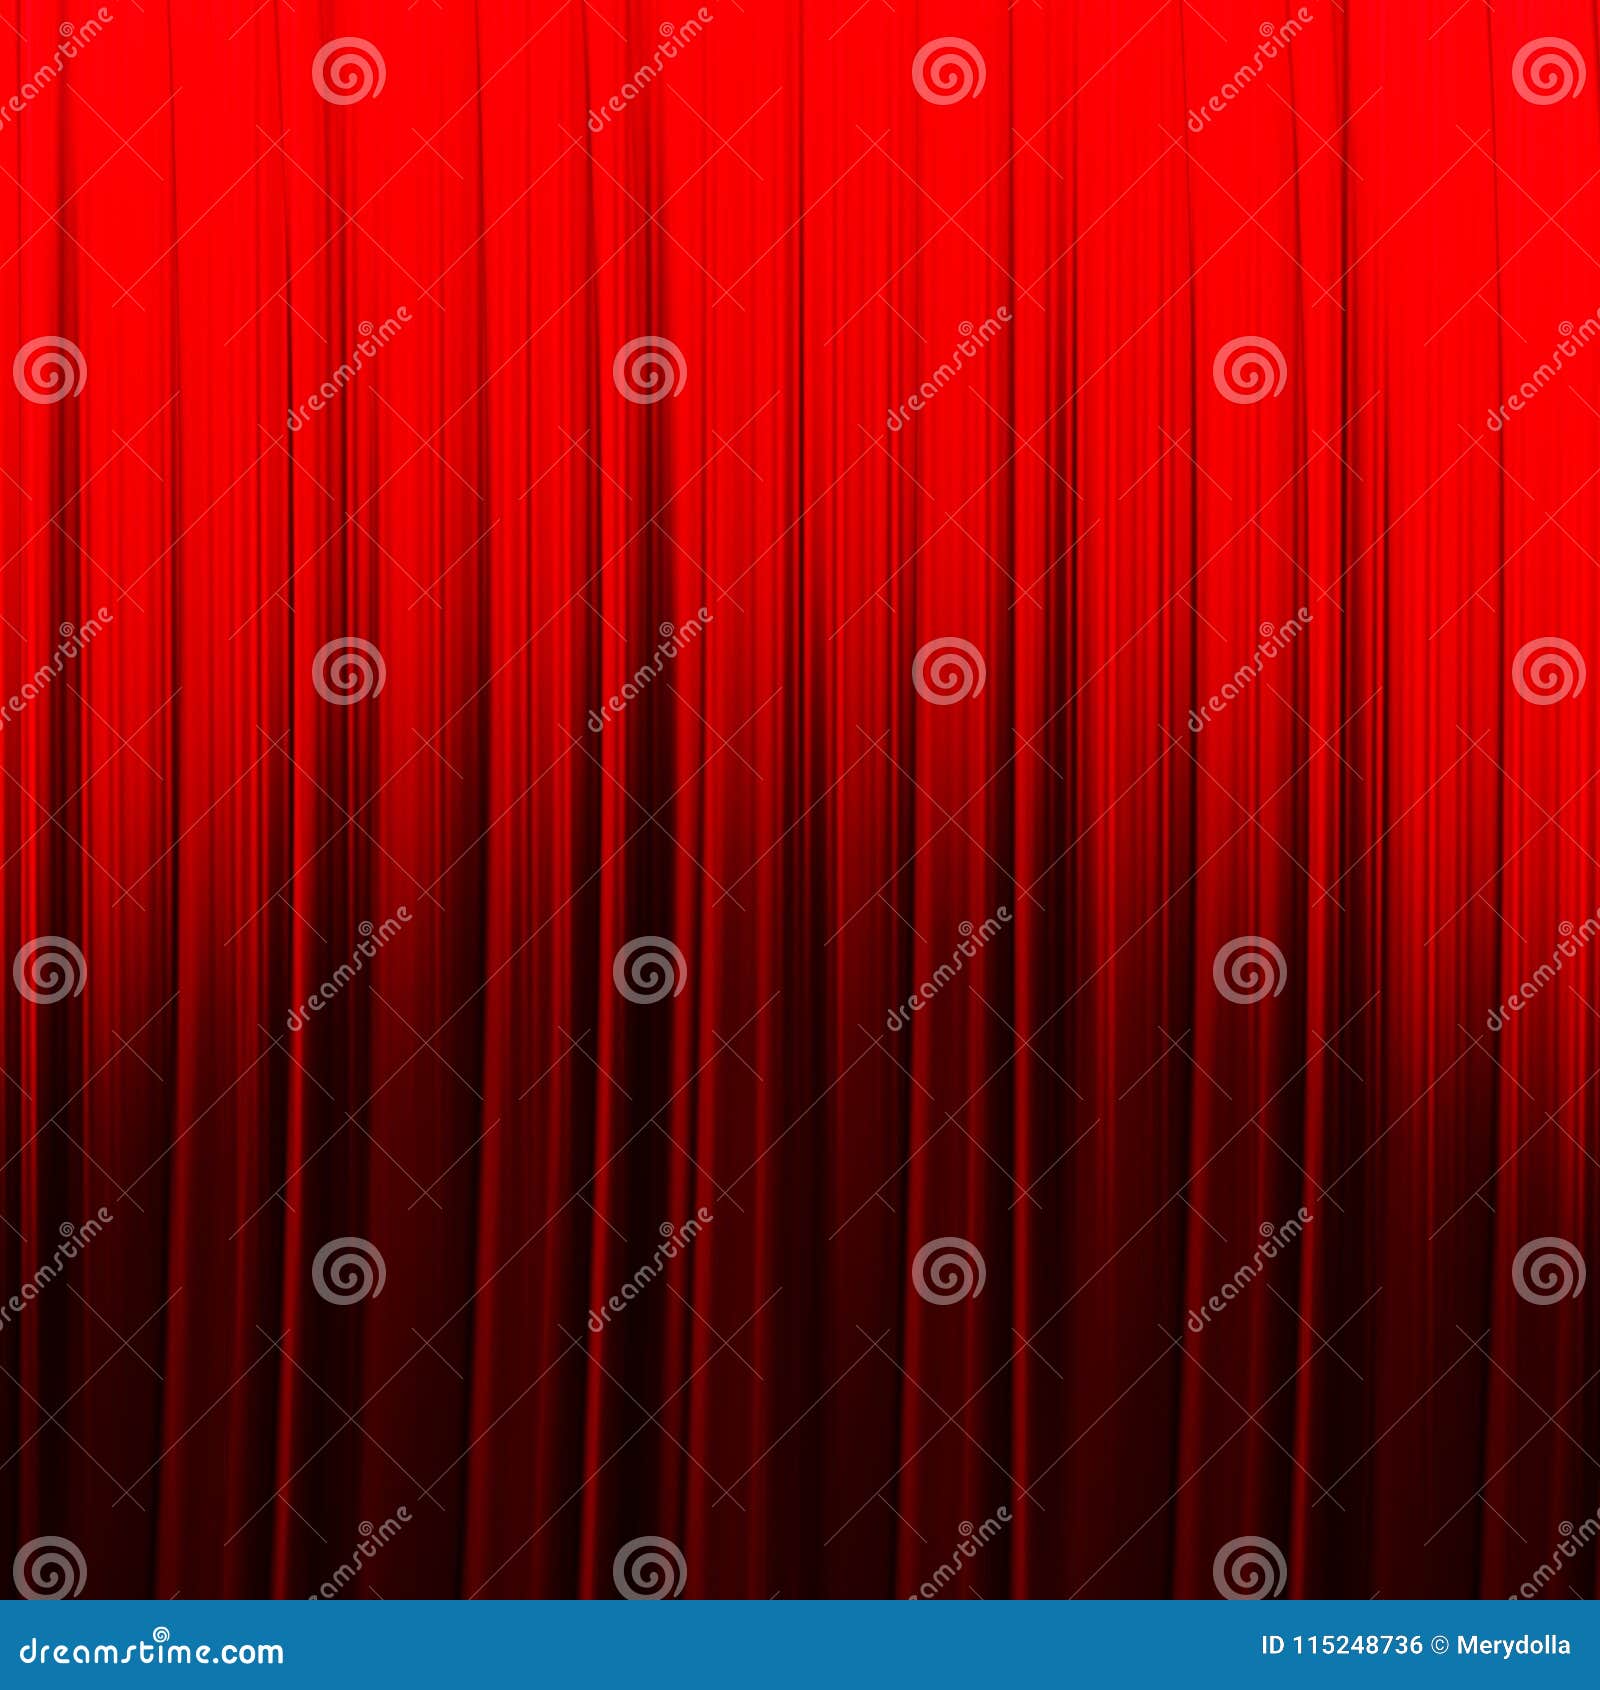 Red curtain background stock photo. Image of classic - 115248736